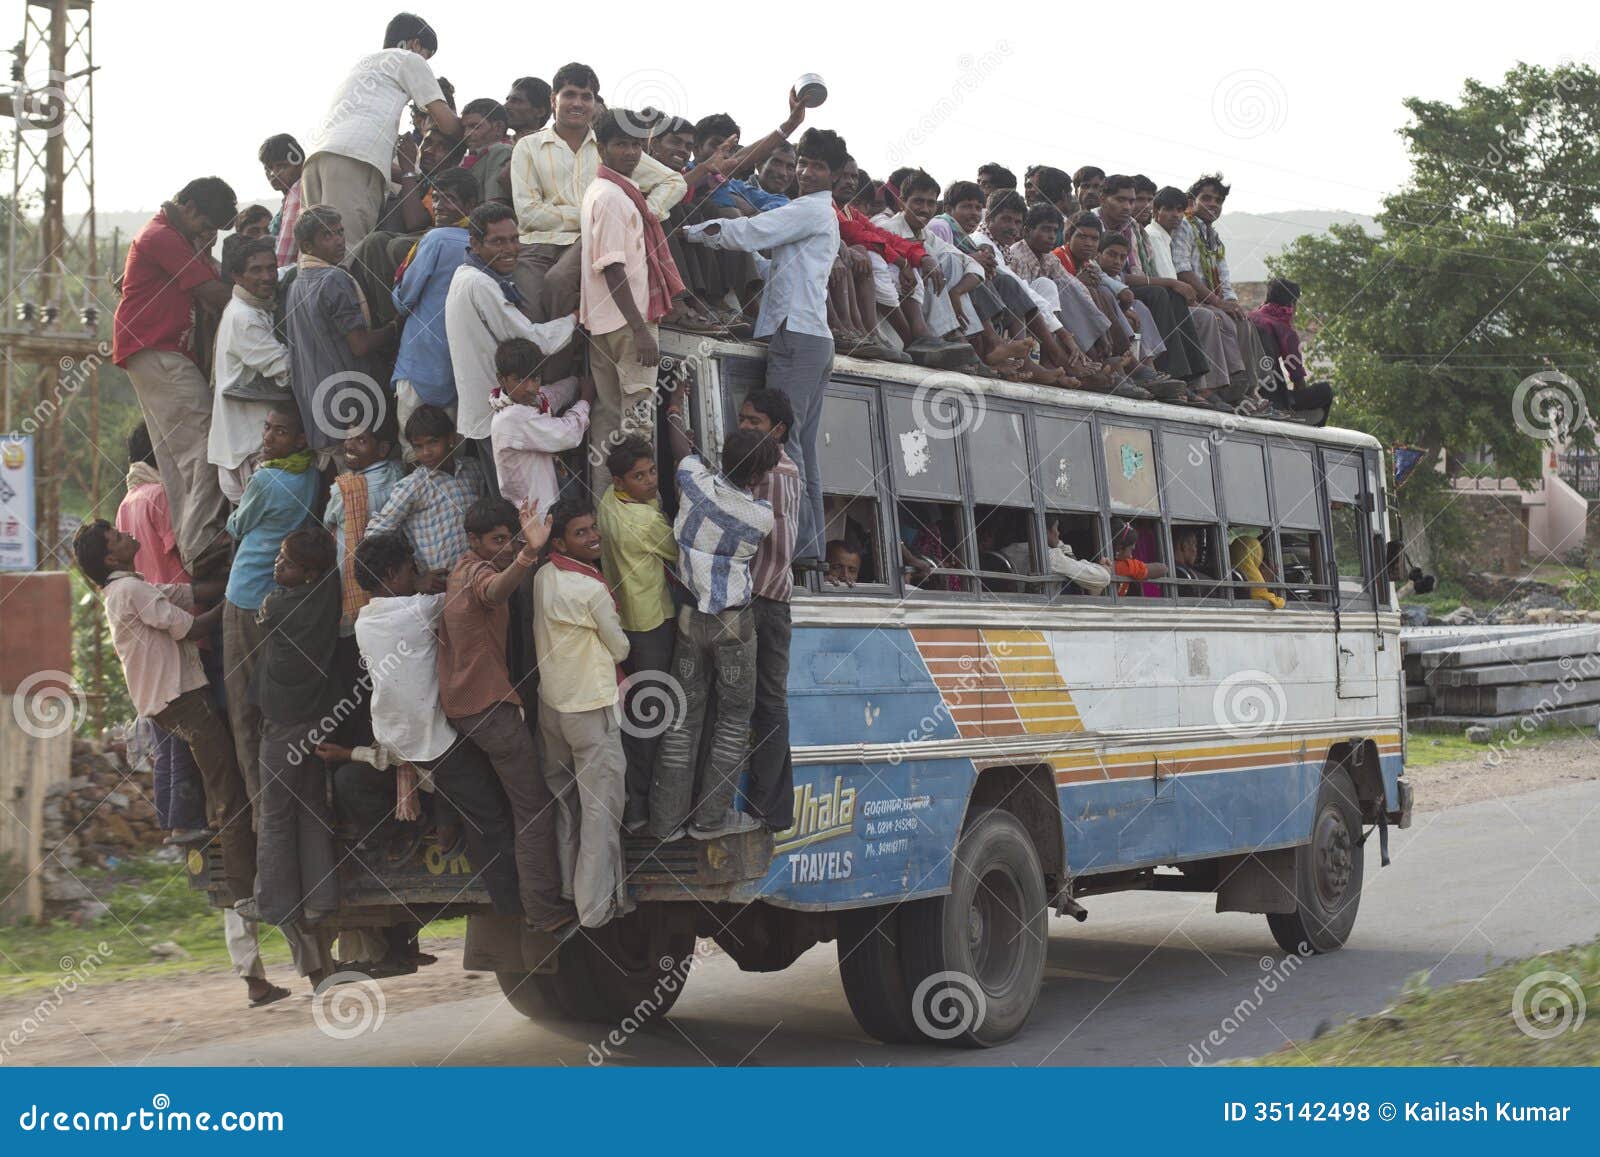 Image result for india crowded bus